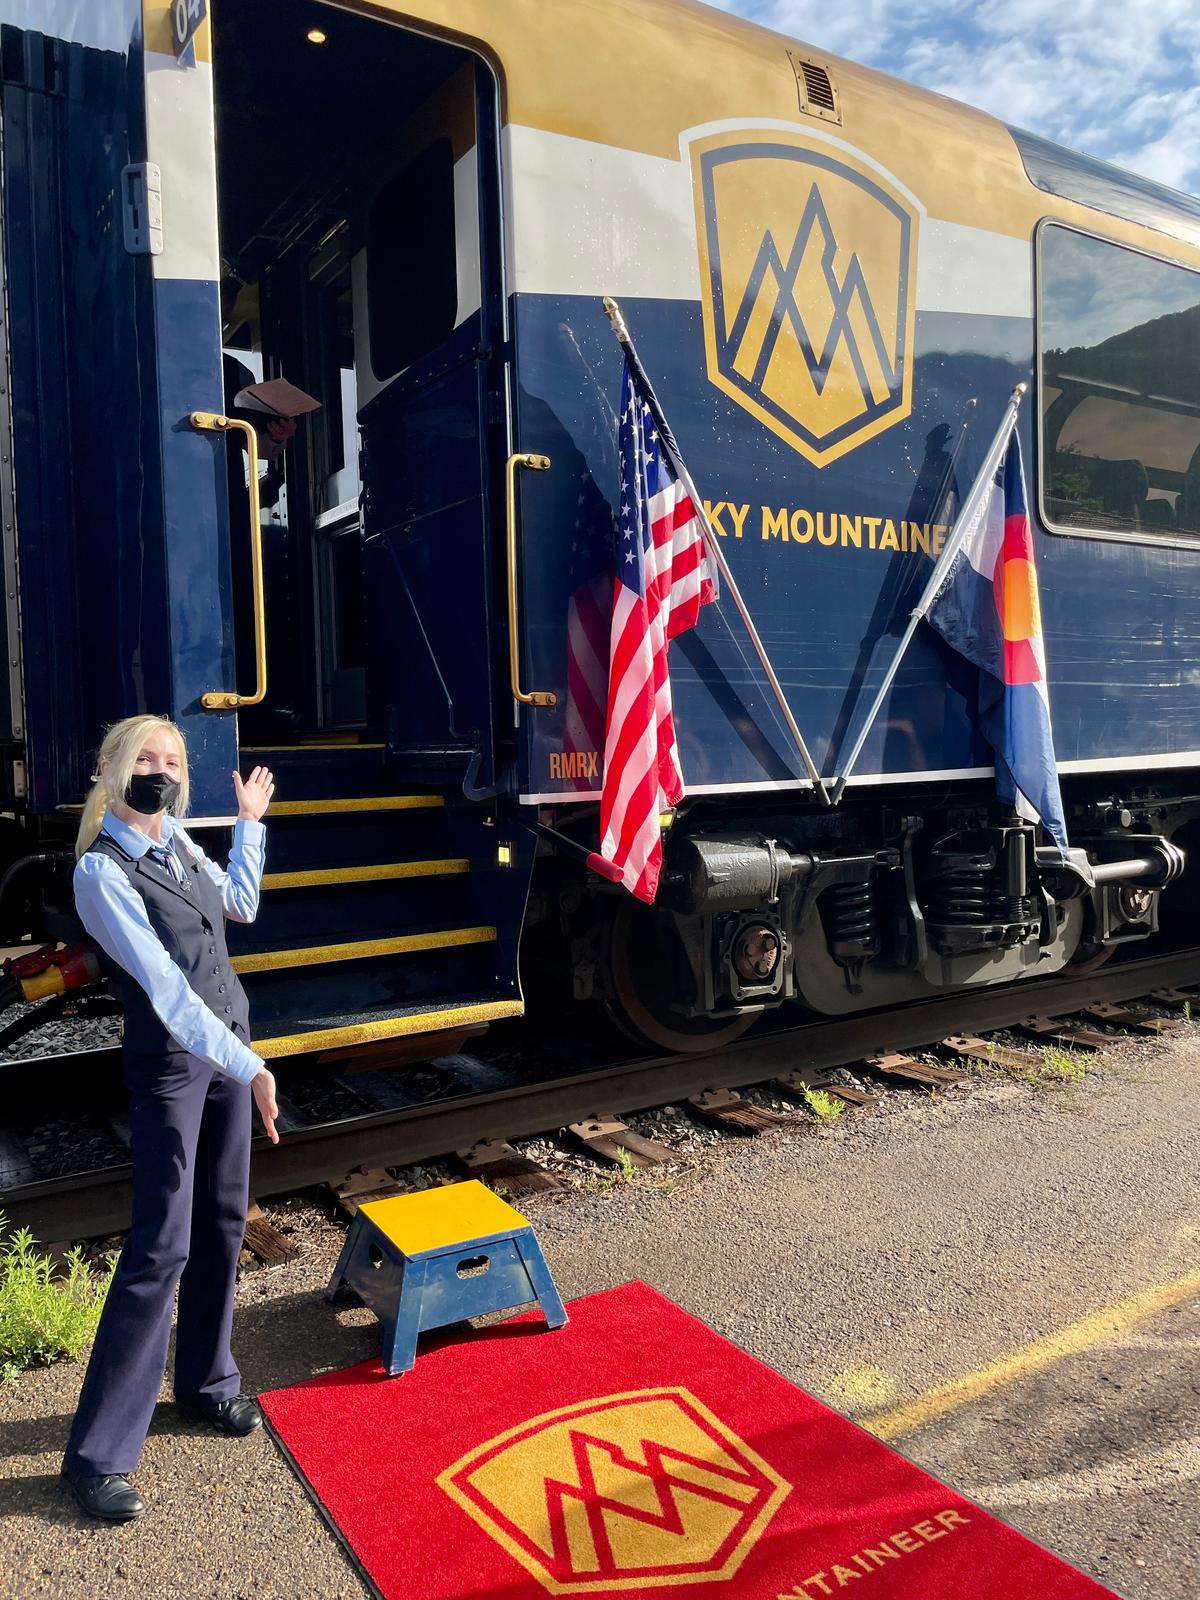 An attendant offers a welcome to the Rocky Mountaineer. (Janna Graber)